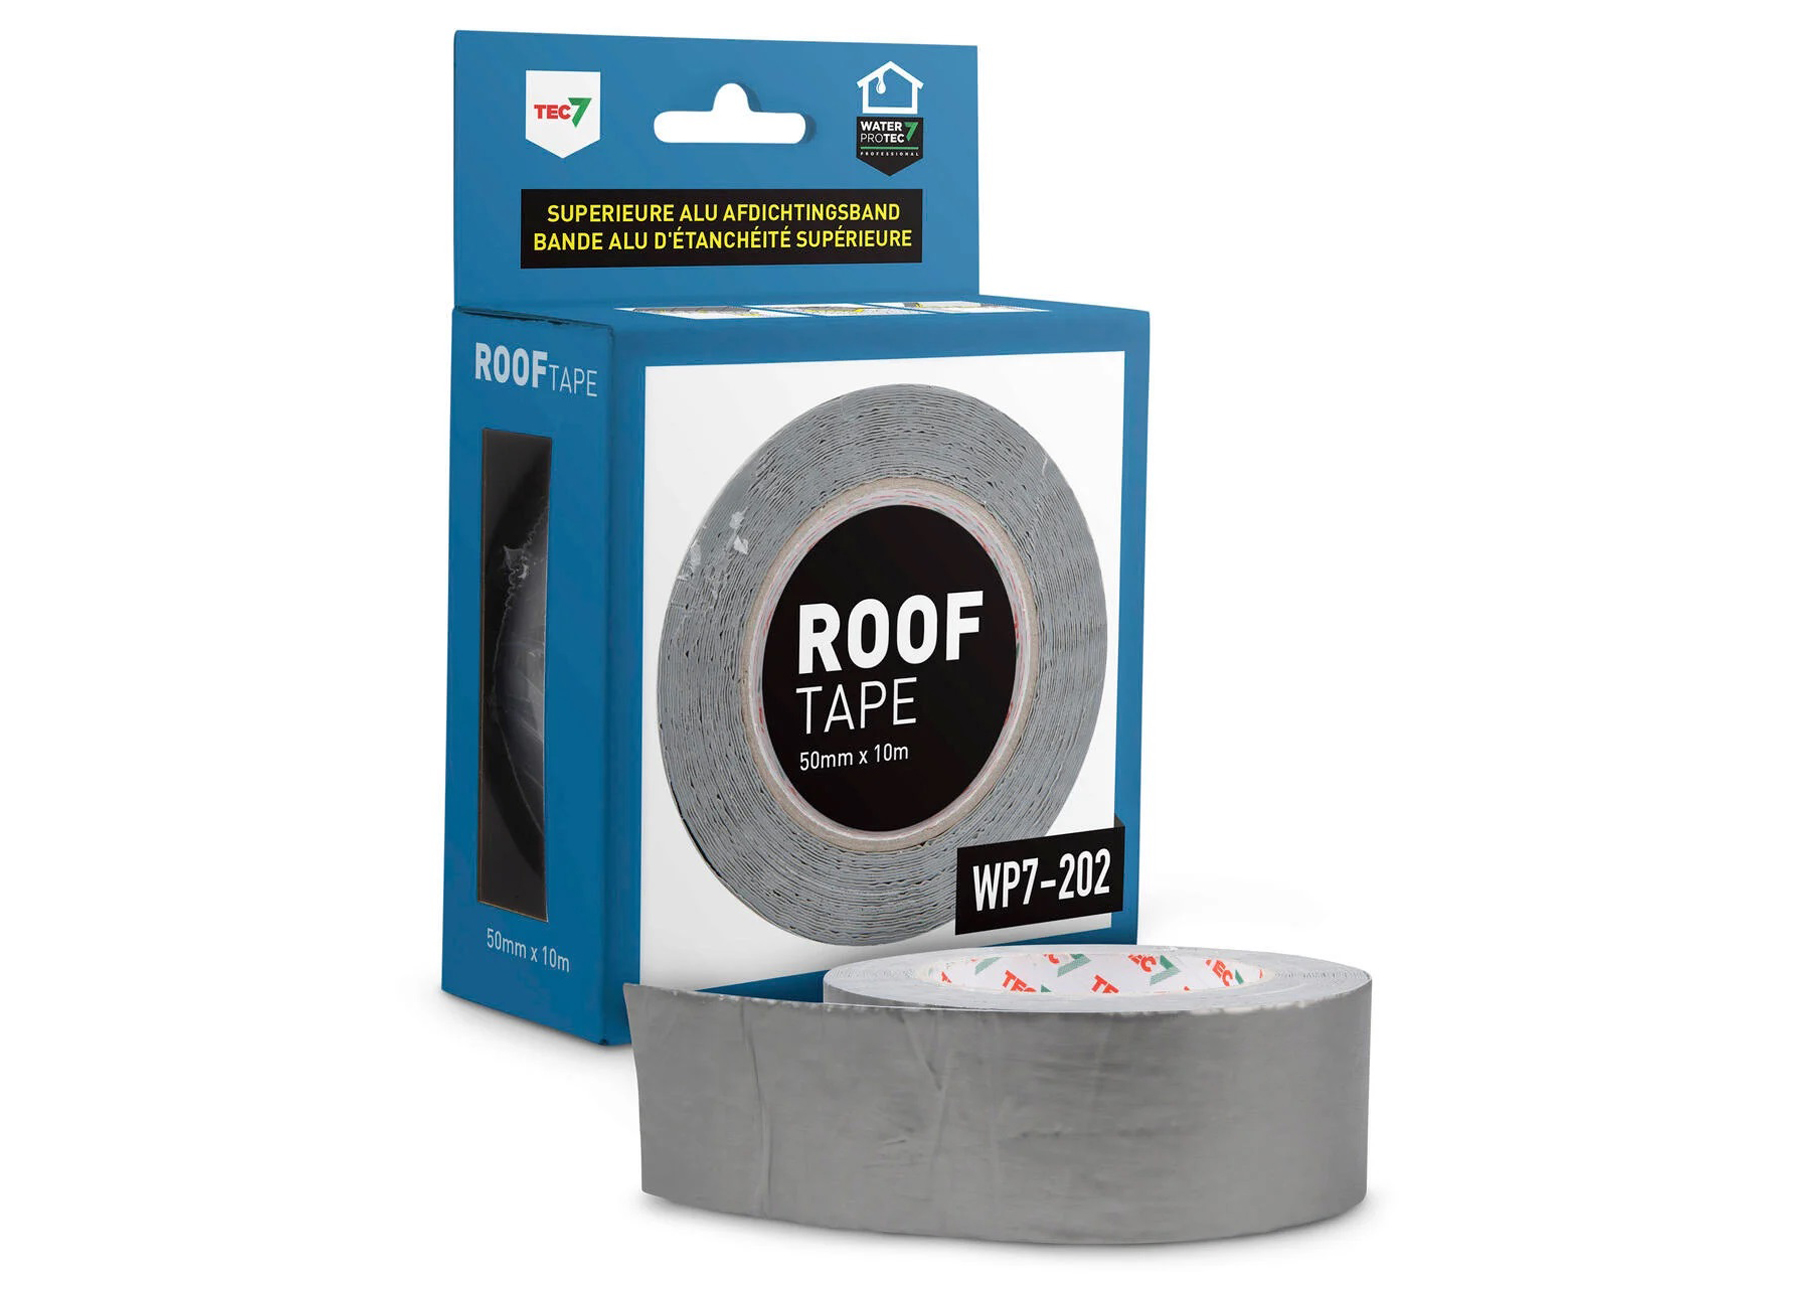 WP7-202 ROOF TAPE 50MMX10M